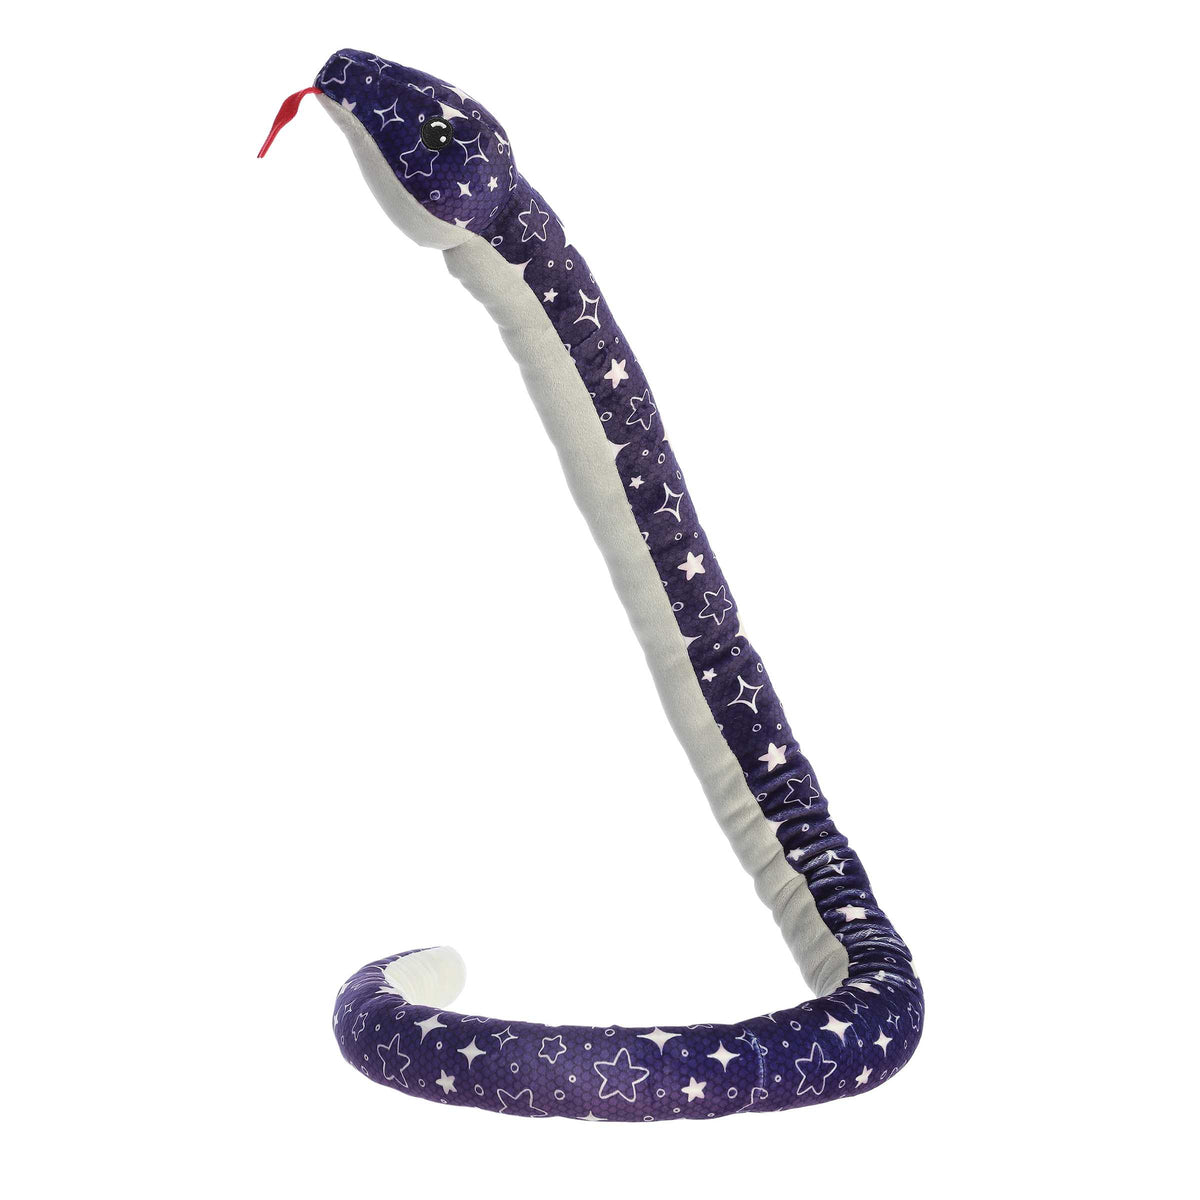 Midnight blue snake plush with starry night pattern, squishy and ideal for cosmic adventure play or stellar collections.